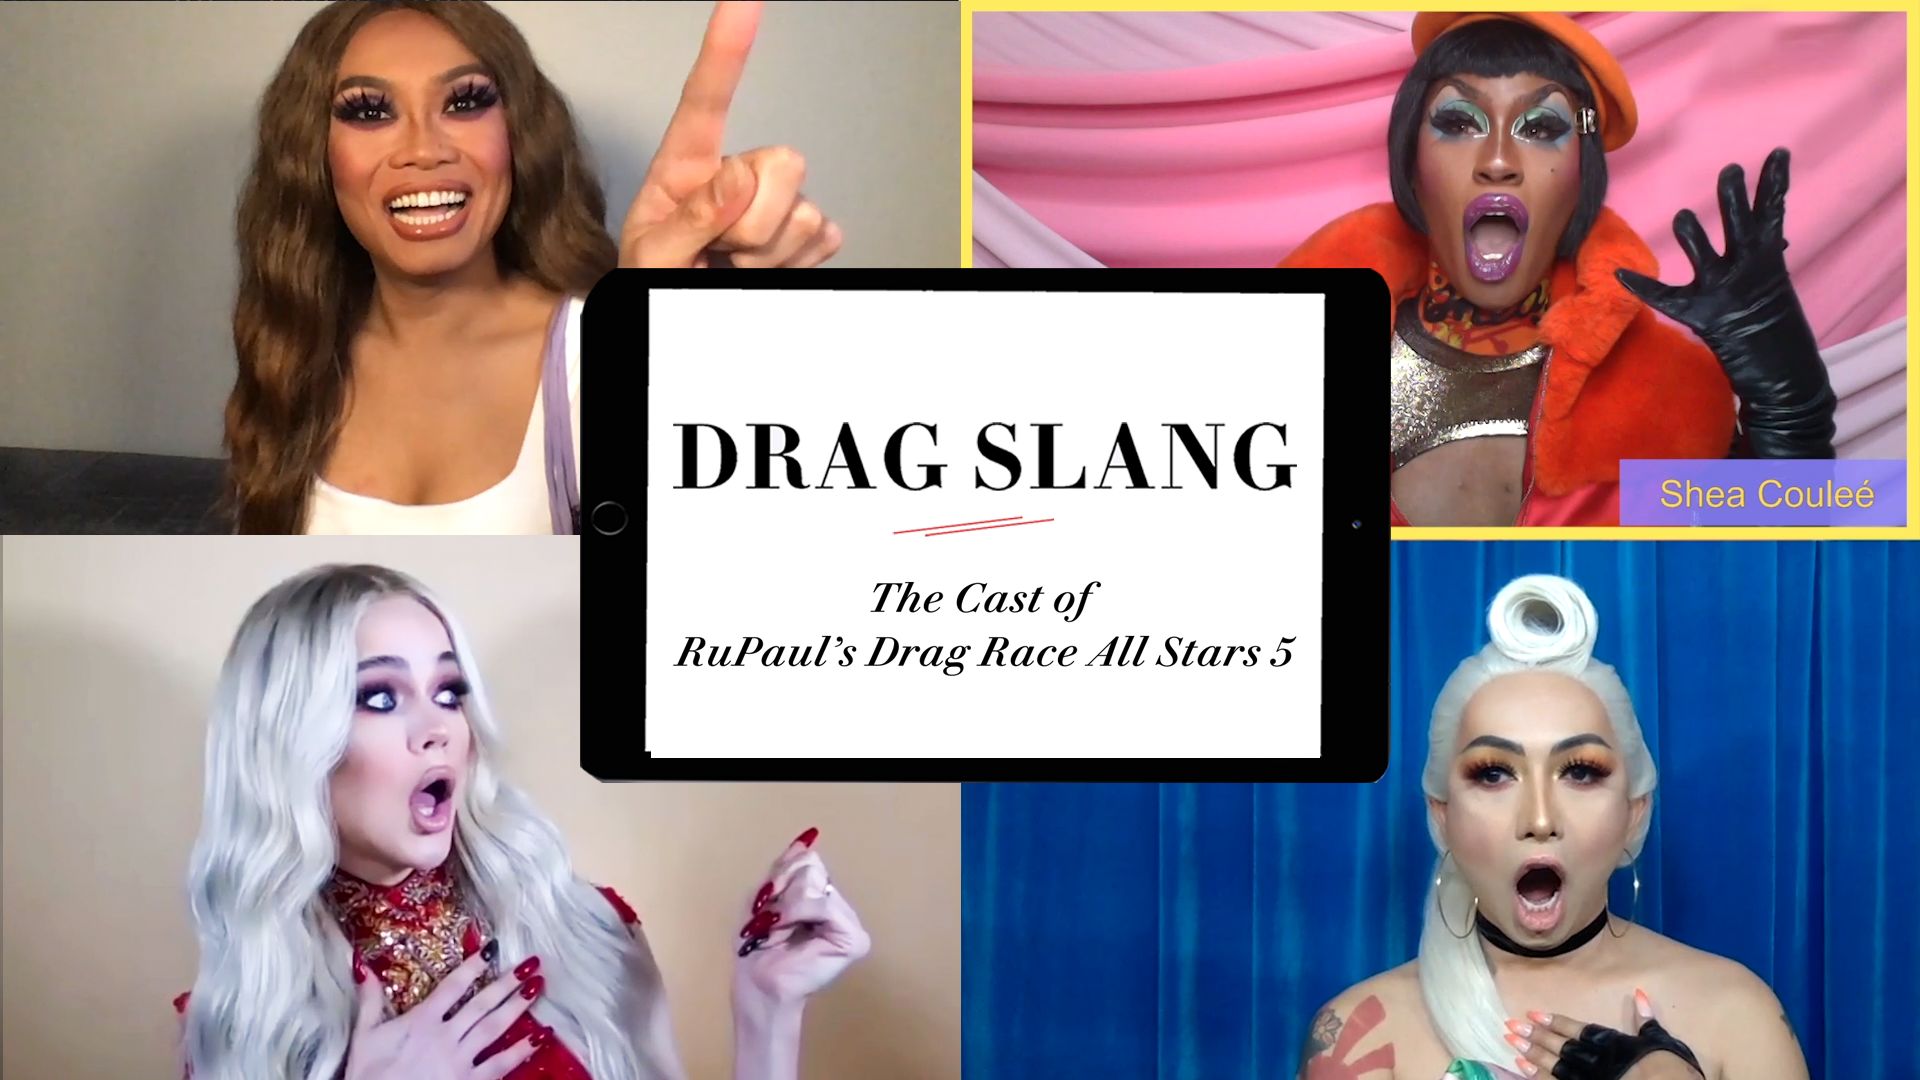 50 Questions With Bob the Drag Queen